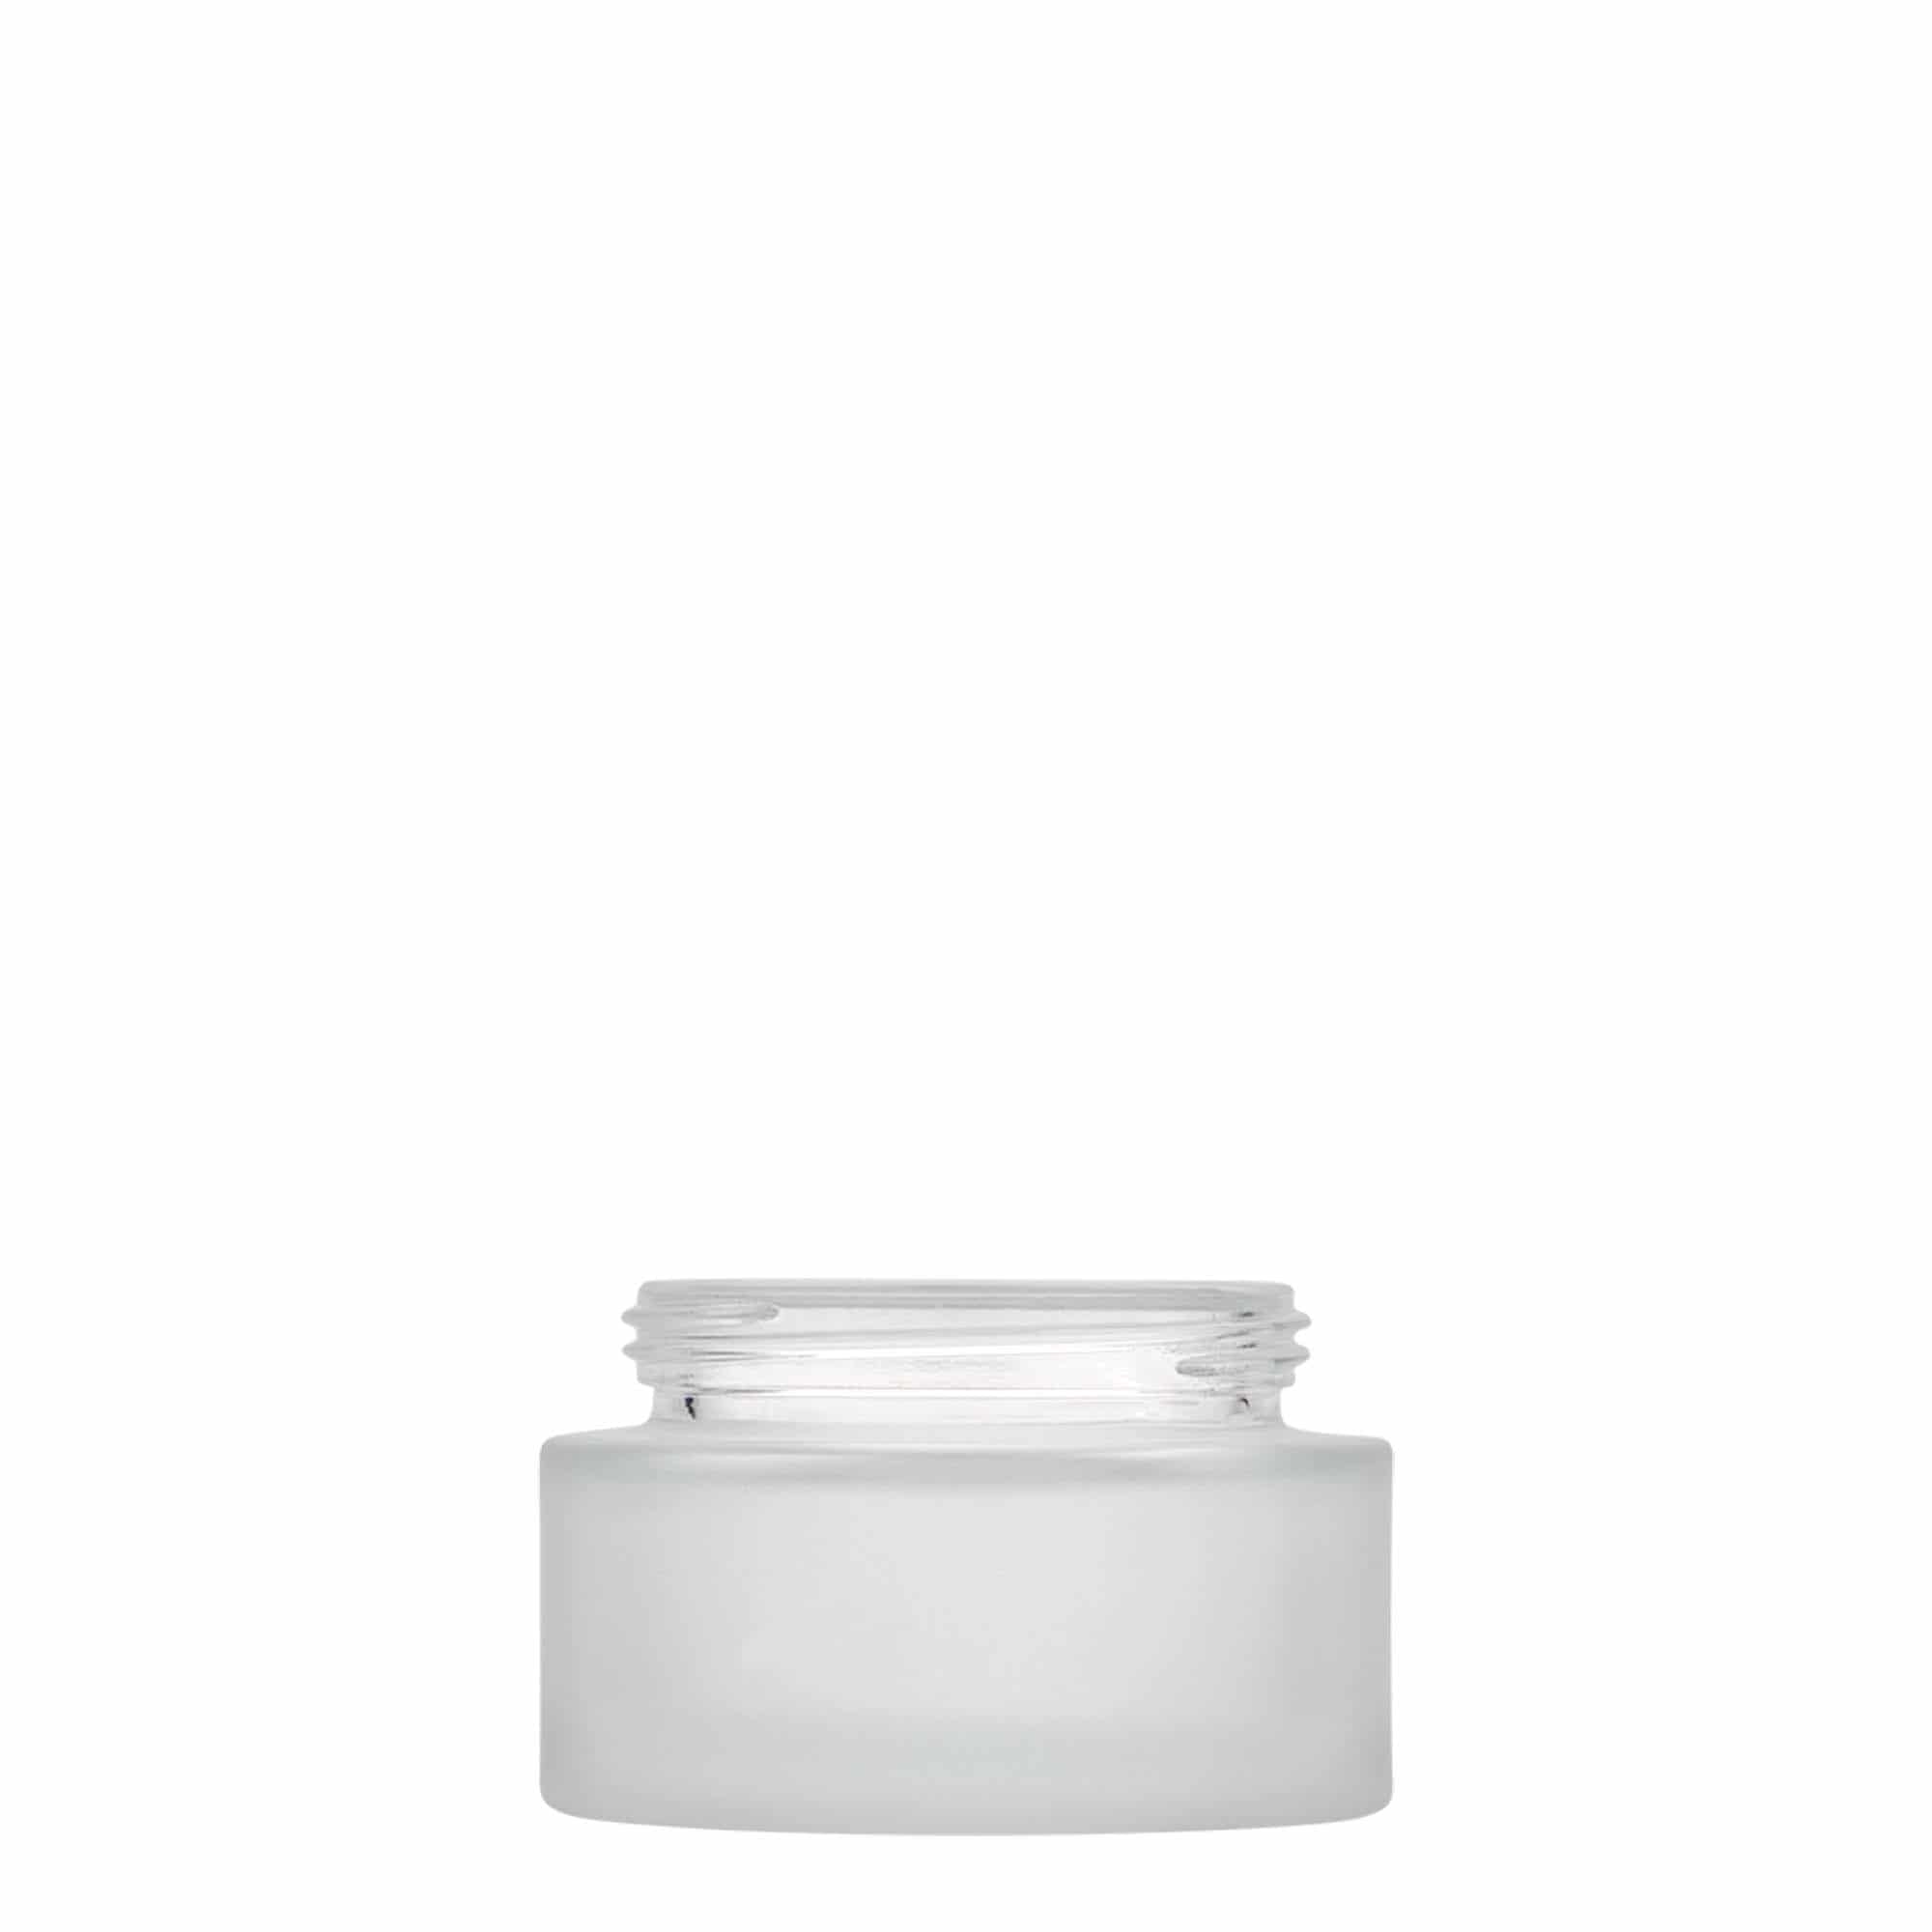 50 ml cosmetic jar 'Platin Edition', glass, frosted, closure: screw cap